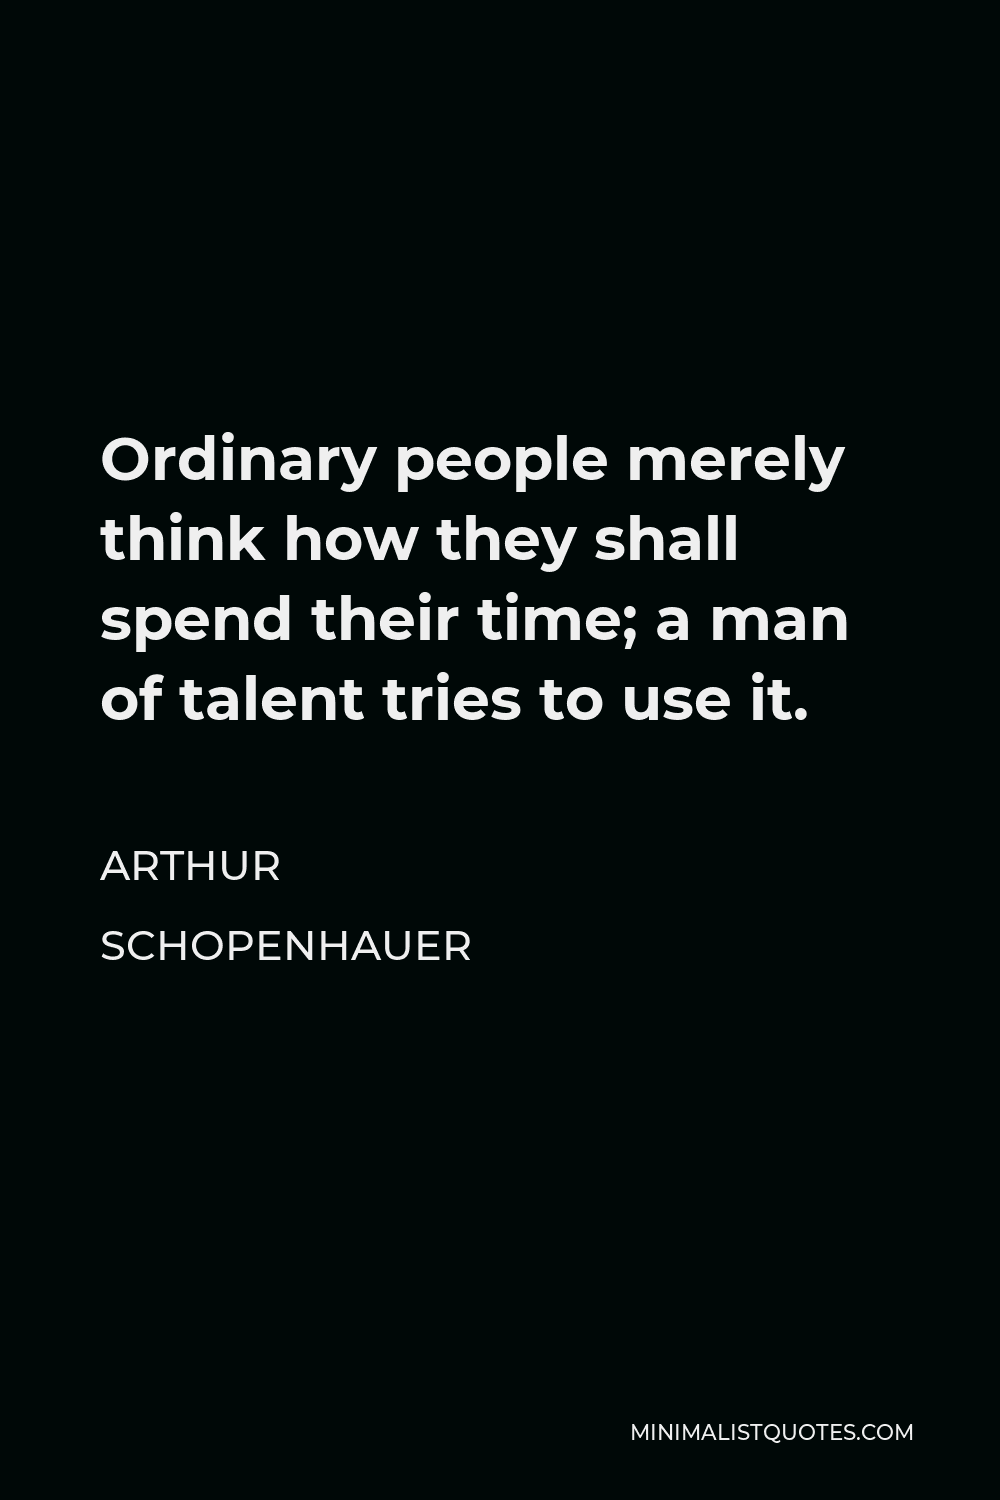 Ordinary people merely think how they shall 'spend' their time; a man of  talent tries to 'use' it.